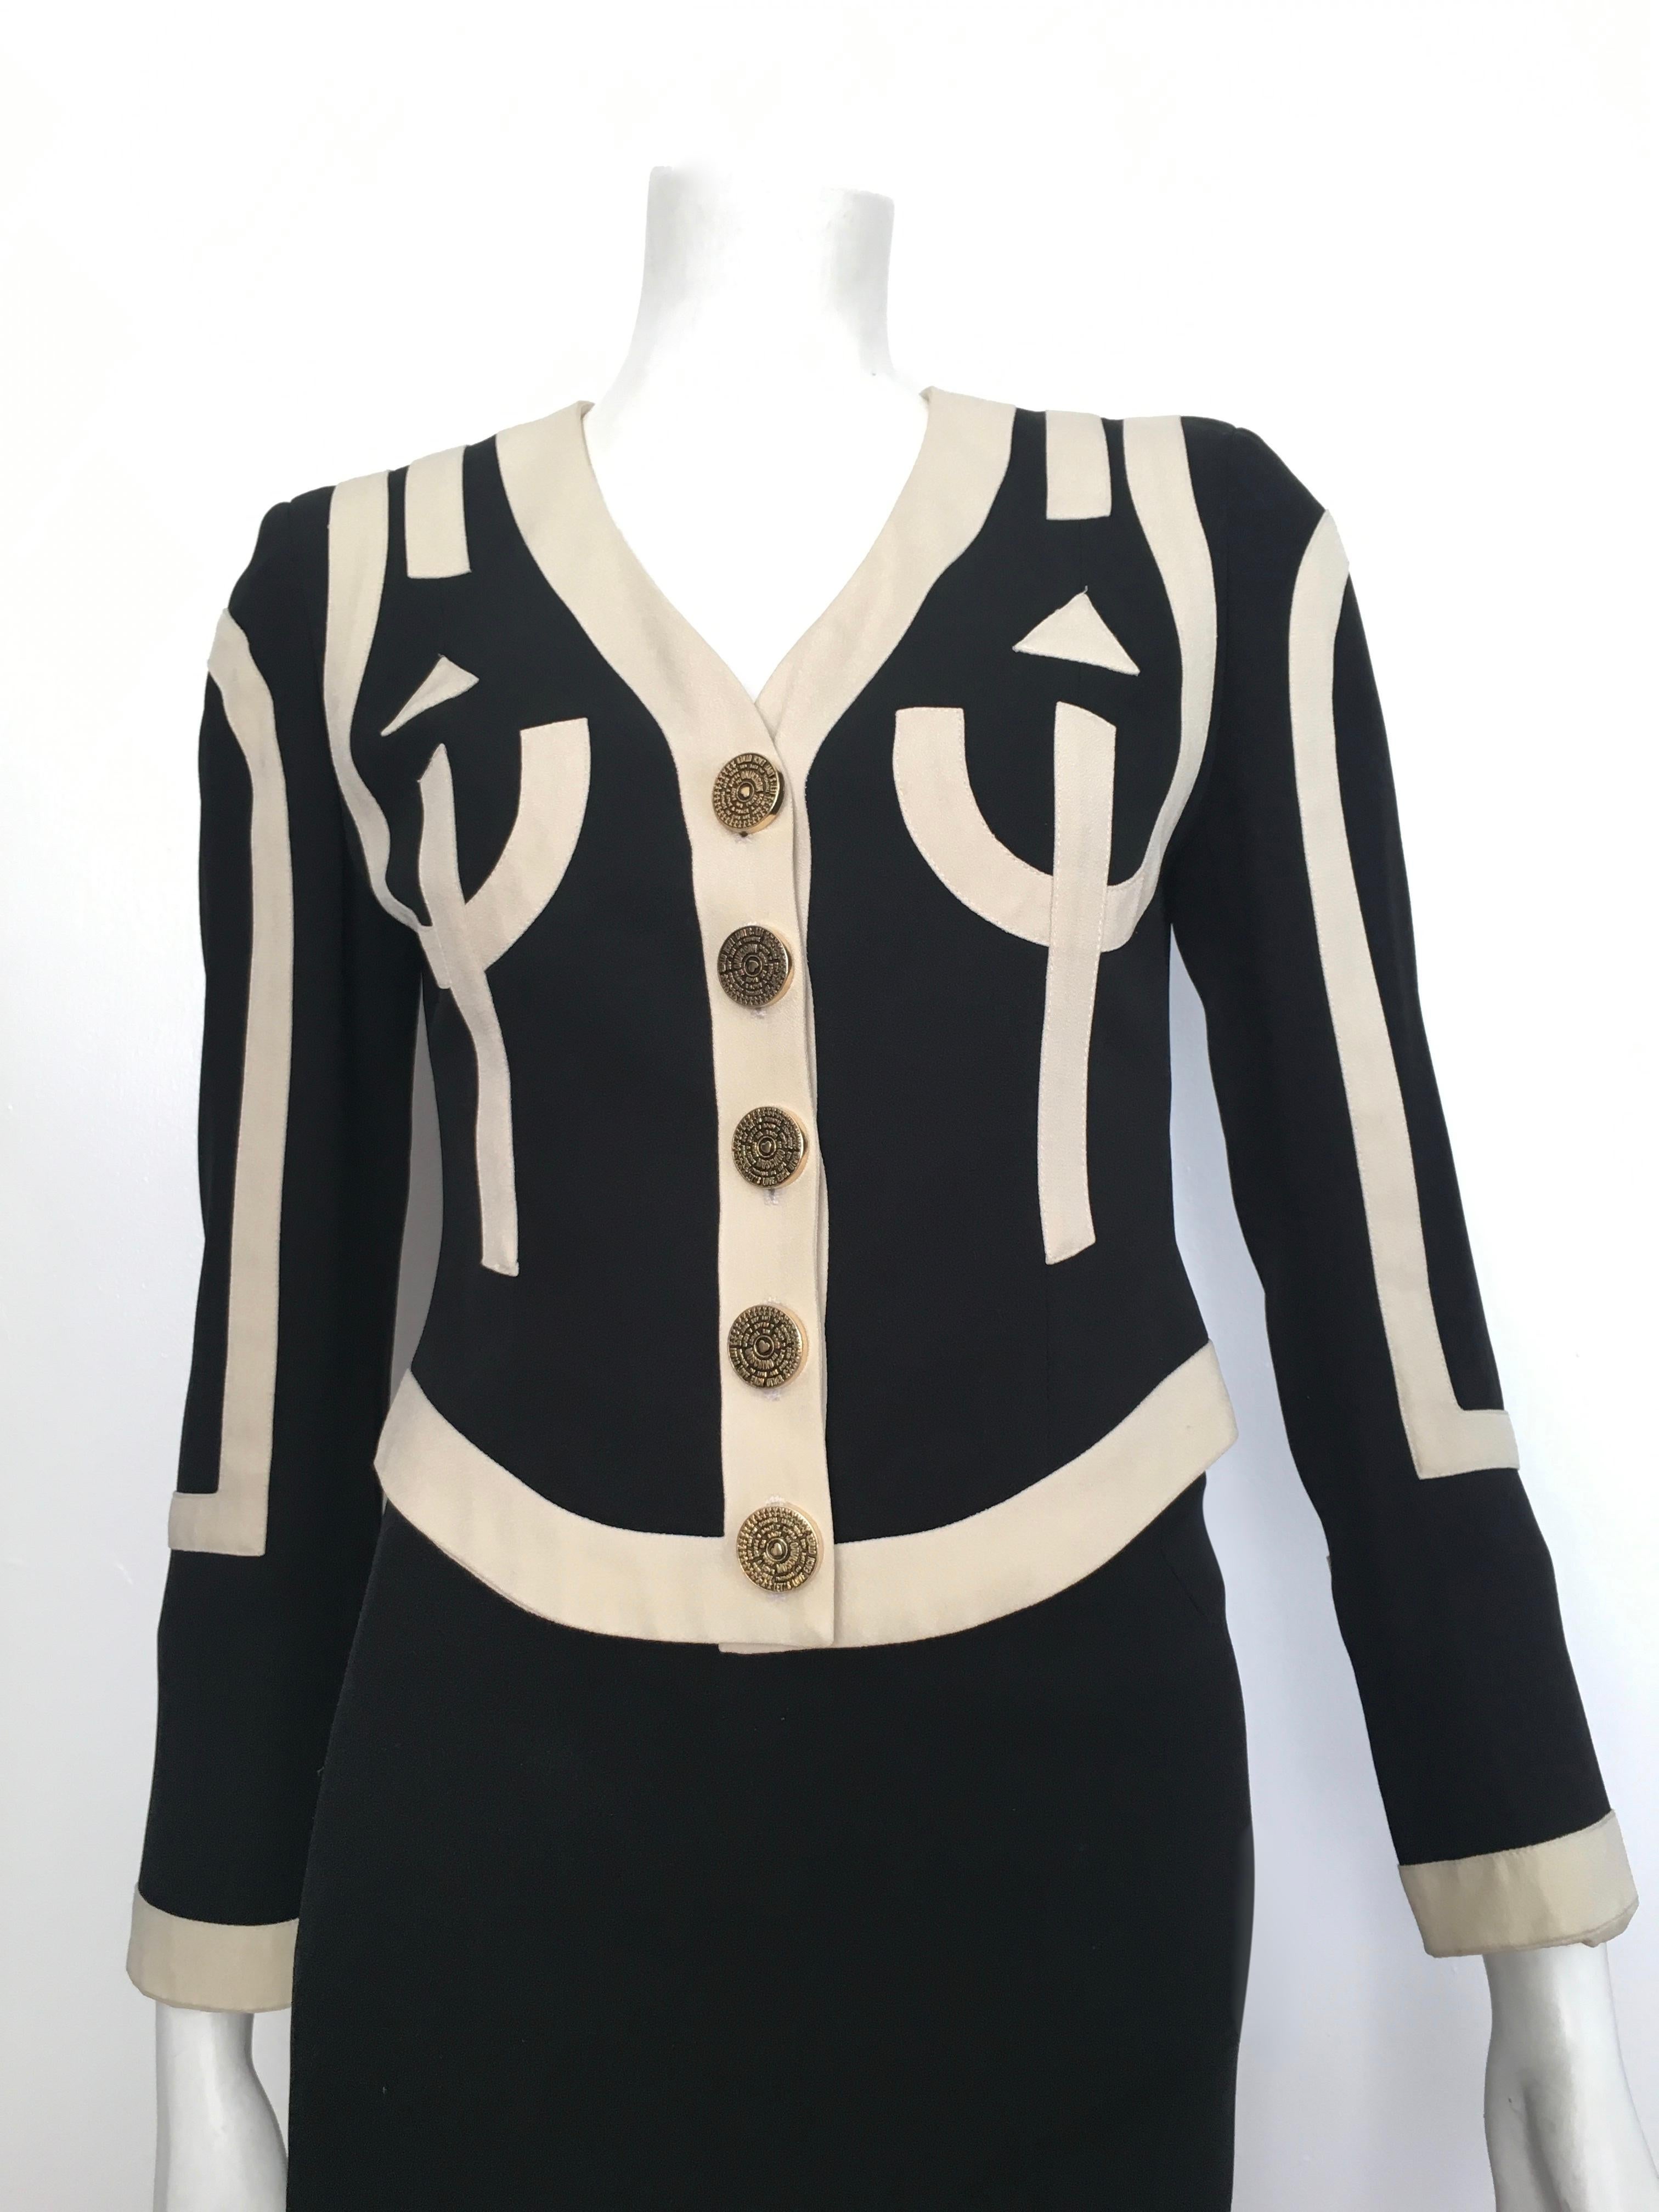 Moschino 1990s Black & Cream Jacket & Skirt Suit Size 4. In Good Condition For Sale In Atlanta, GA